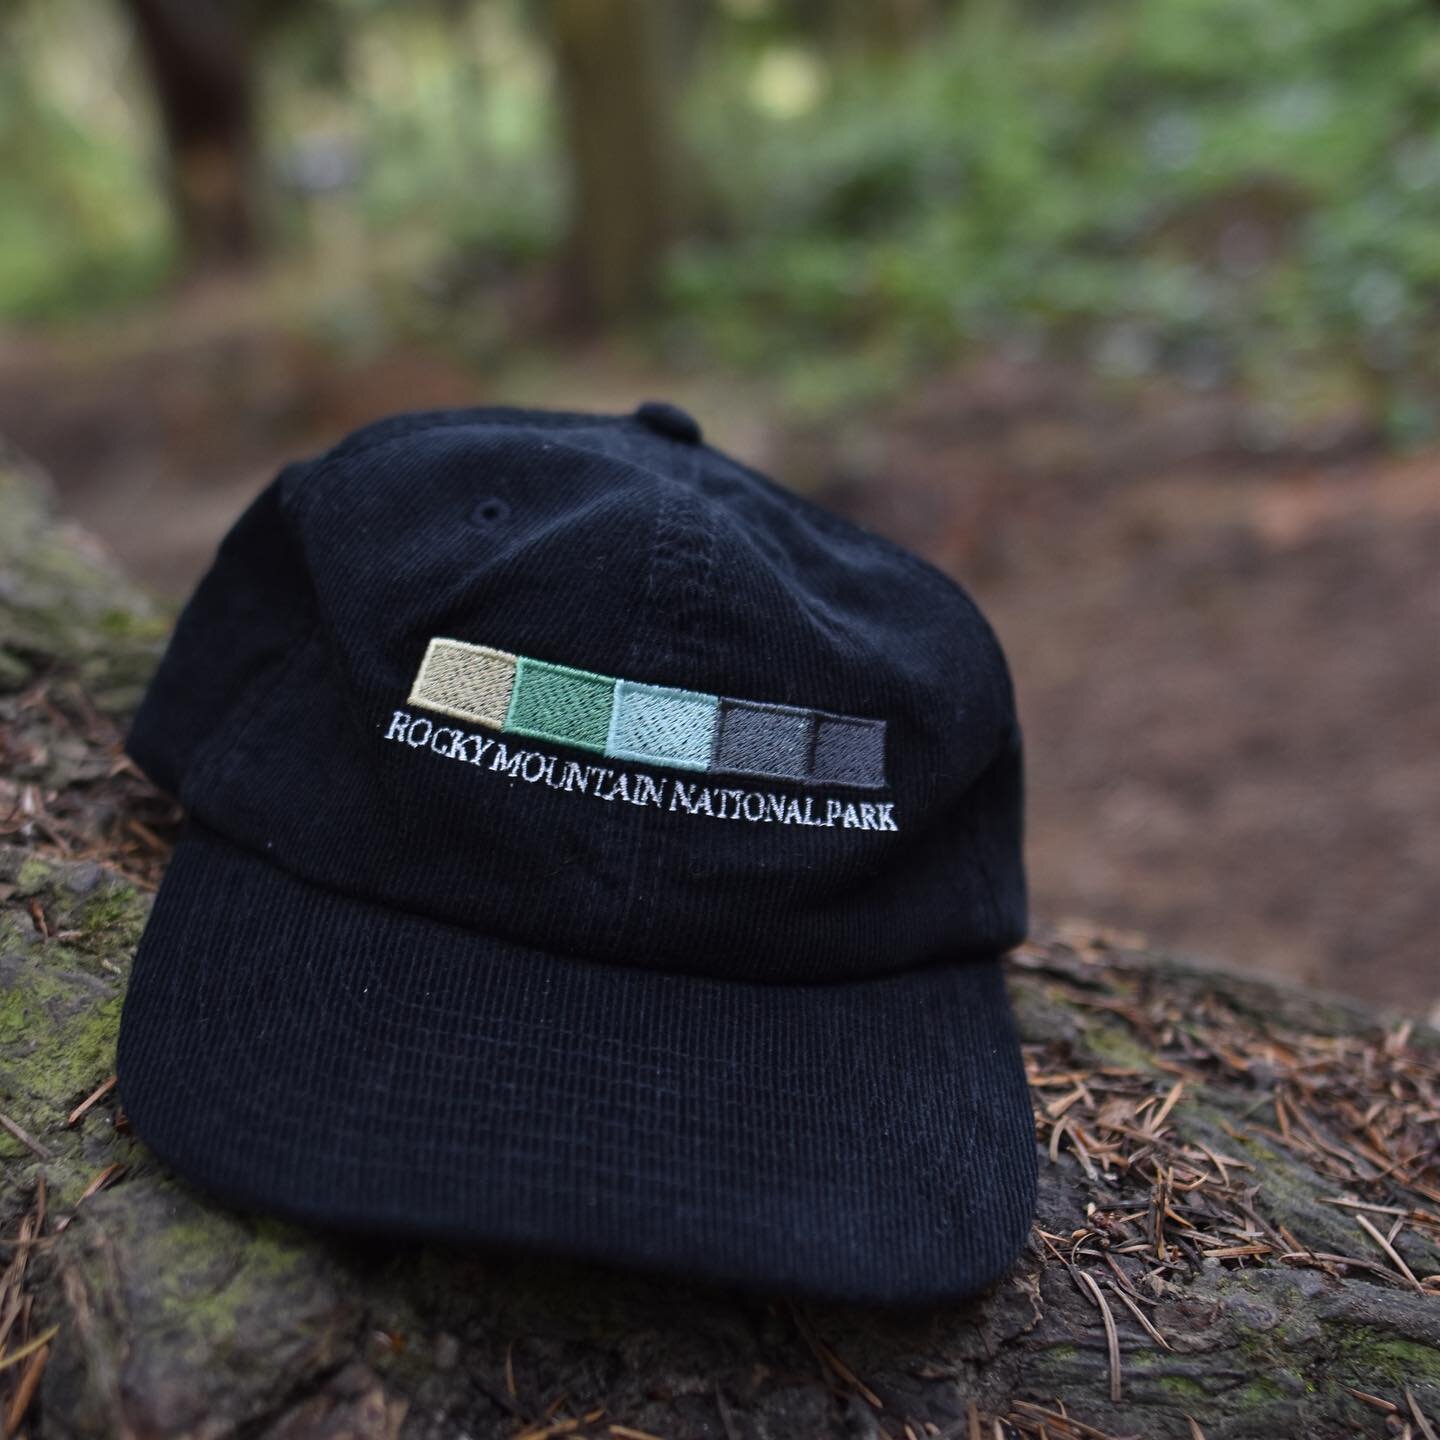 Our park palette corduroy hats are the perfect way to show off your love for national parks &mdash; AND each purchase gives back to the parks you know and love 💚